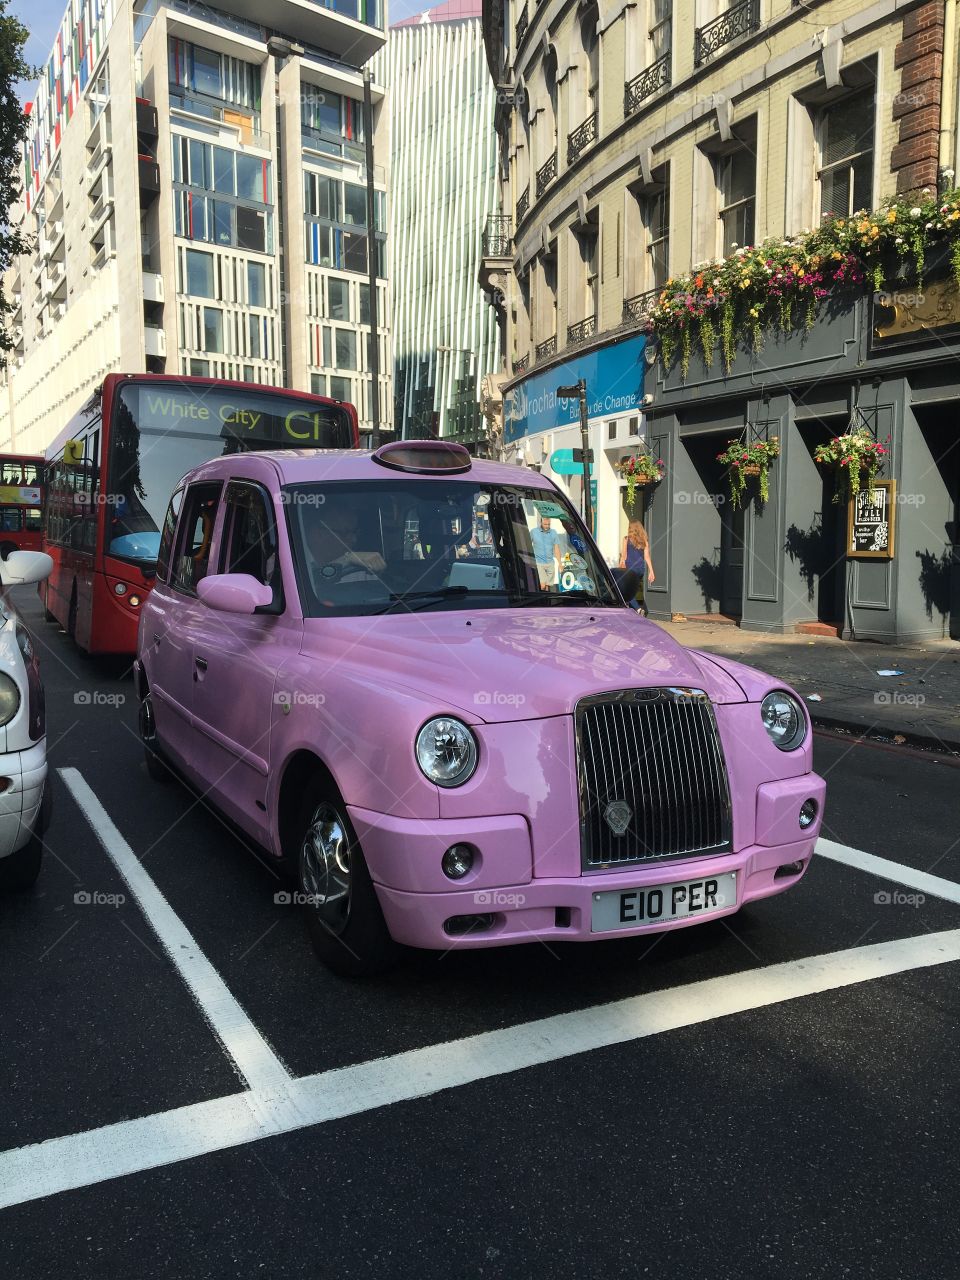 Taxi in London 